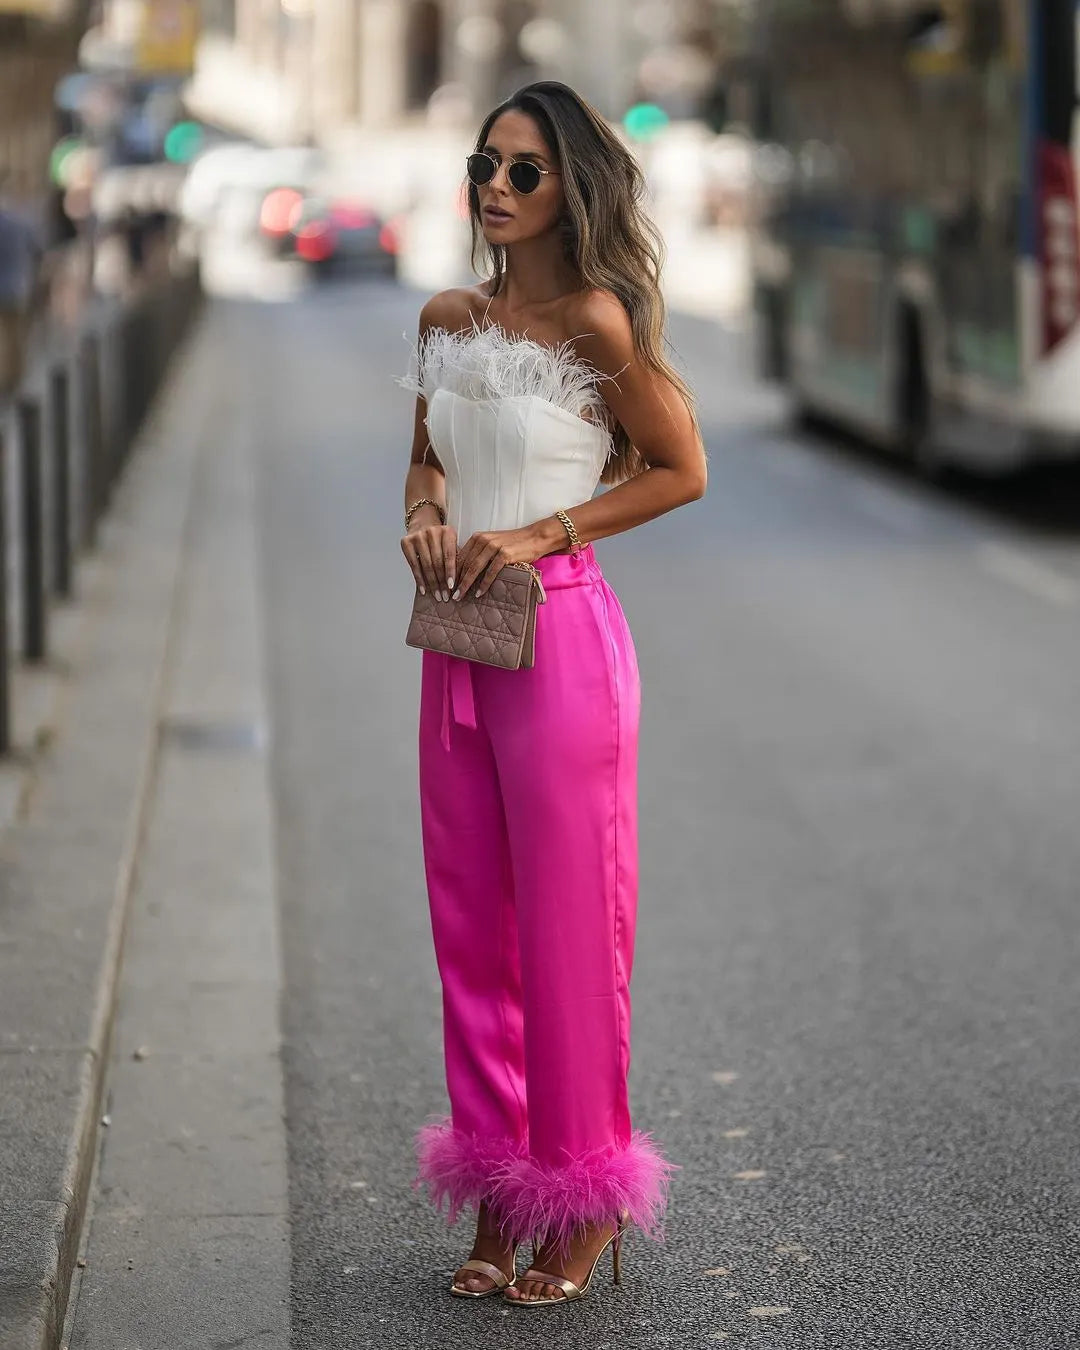 Go pink with NADINE MERABI: Why wear pink today?